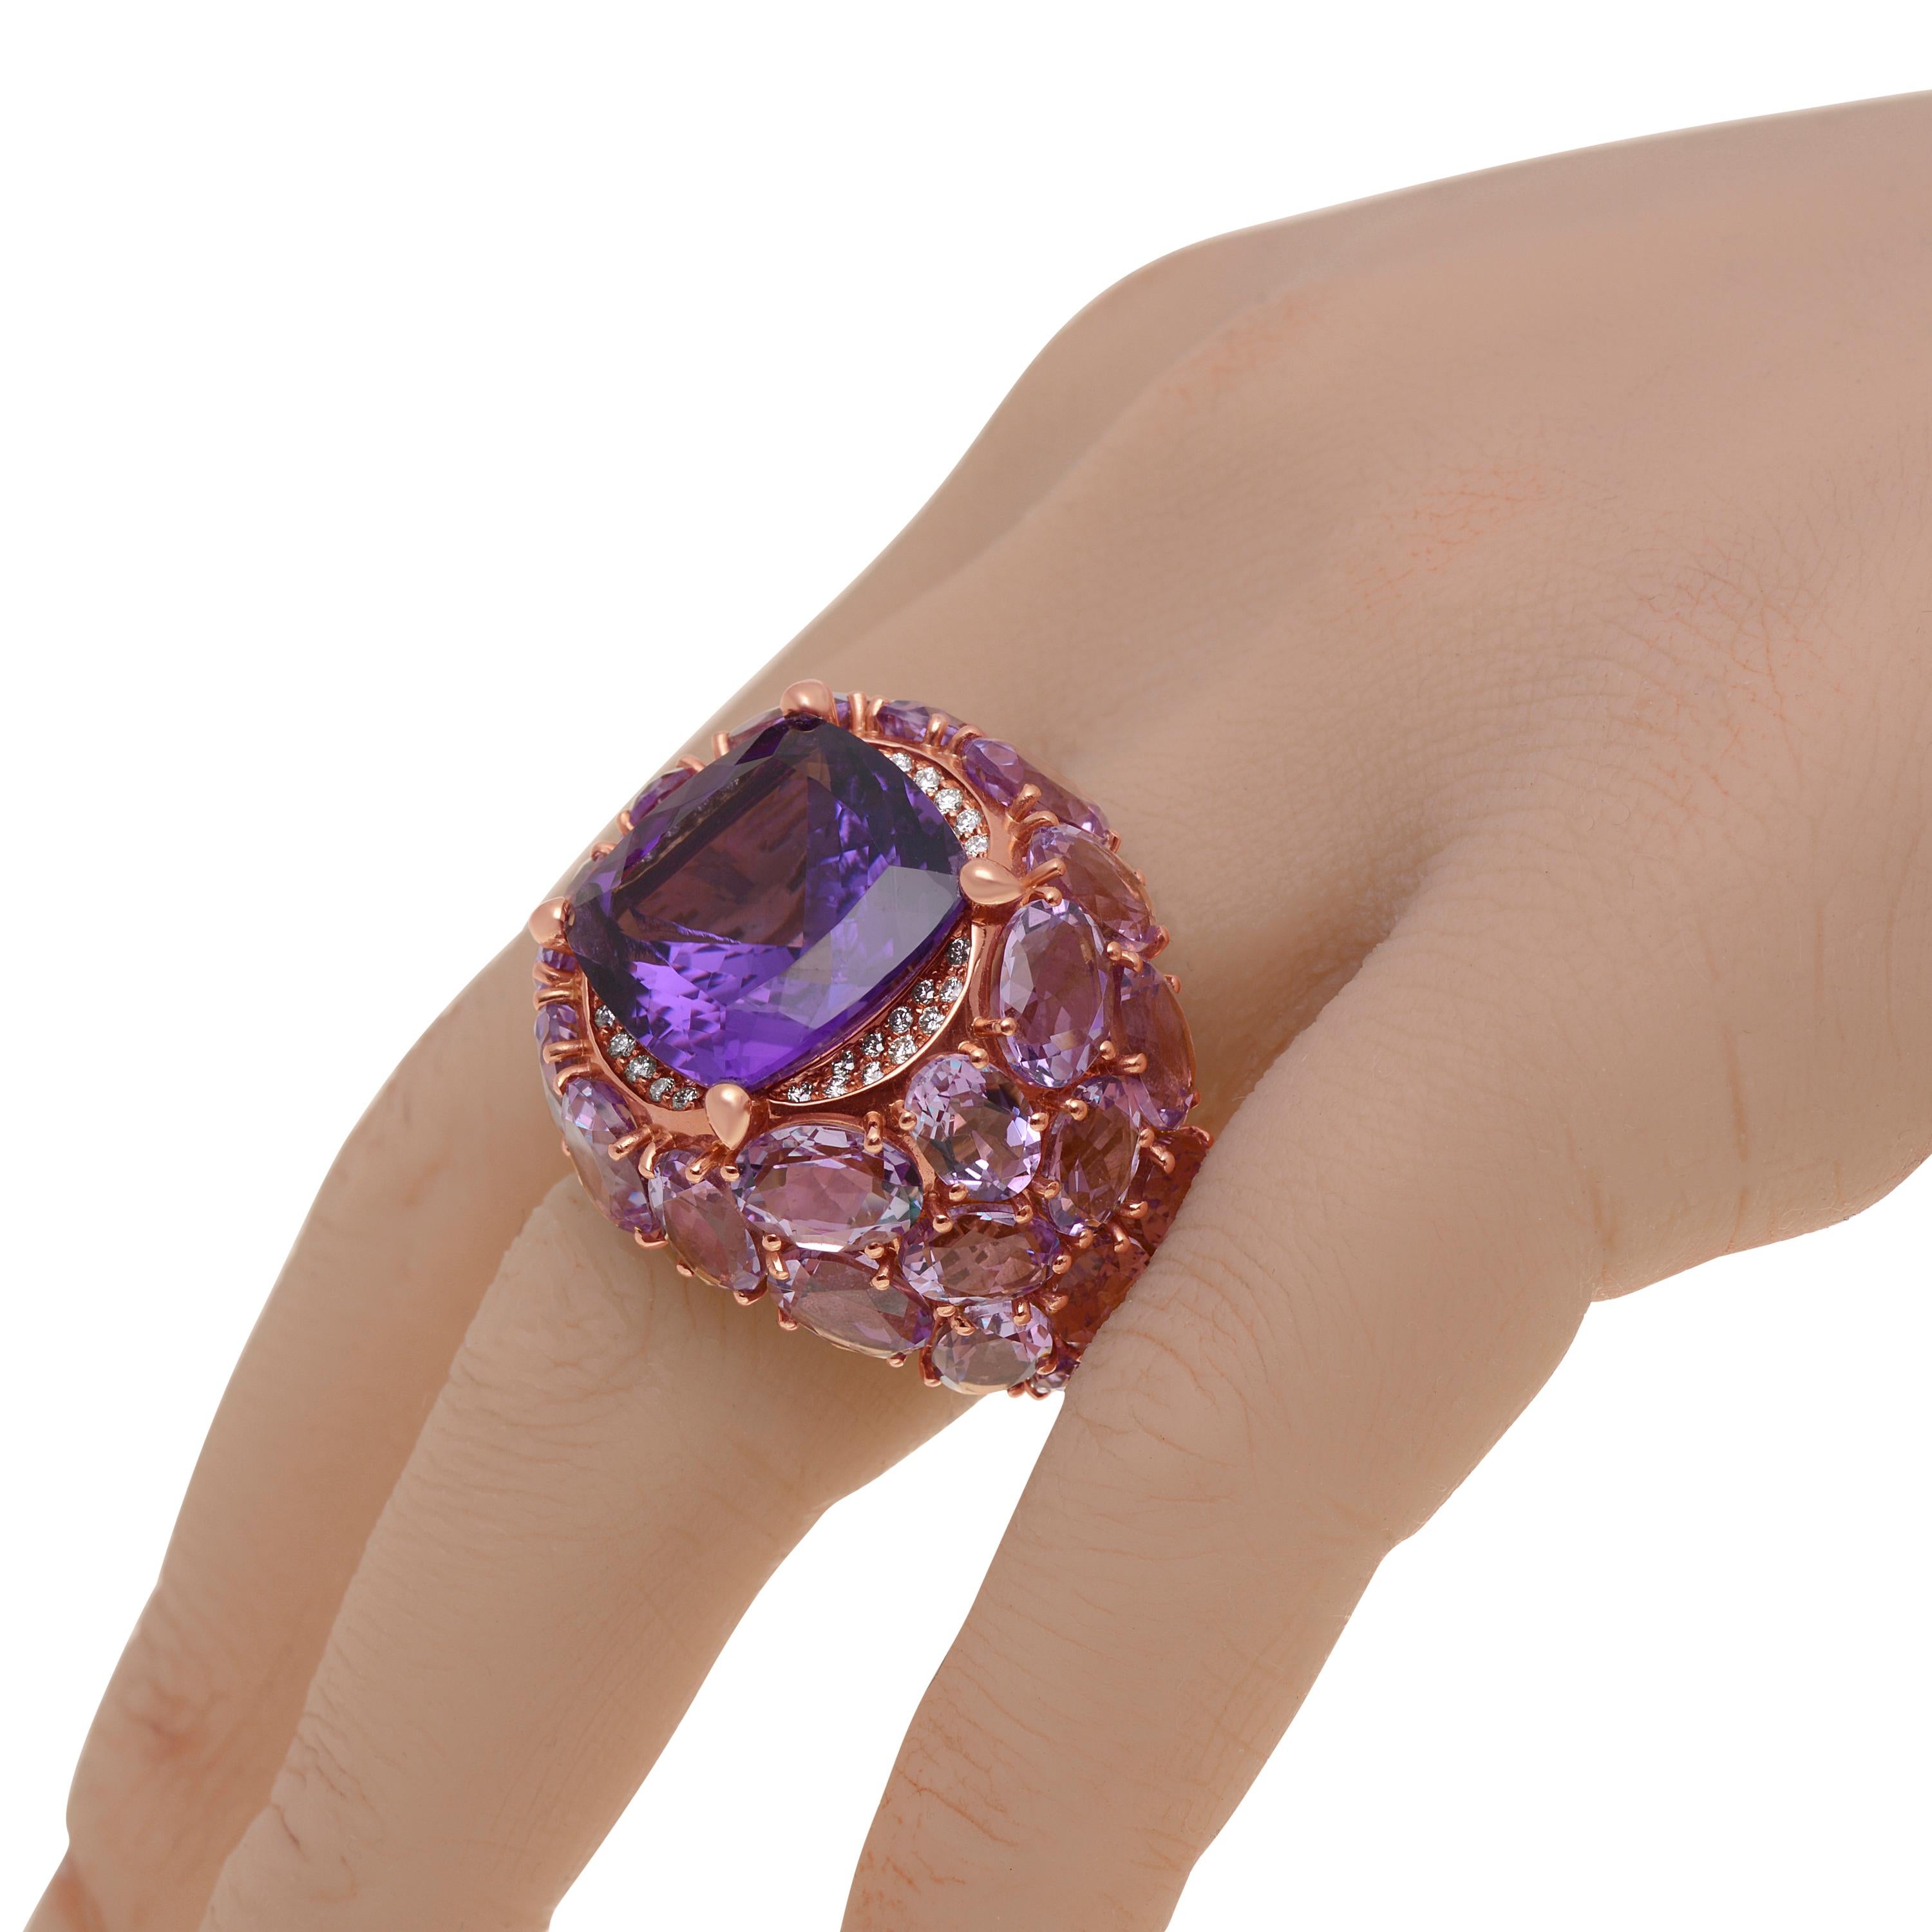 This bejeweled Mimi Milano 18K rose gold statement ring features amethyst and 0.42ct. tw. diamonds set in 18K rose gold. The ring size is 7.25 (54.5). The band width is 1/4